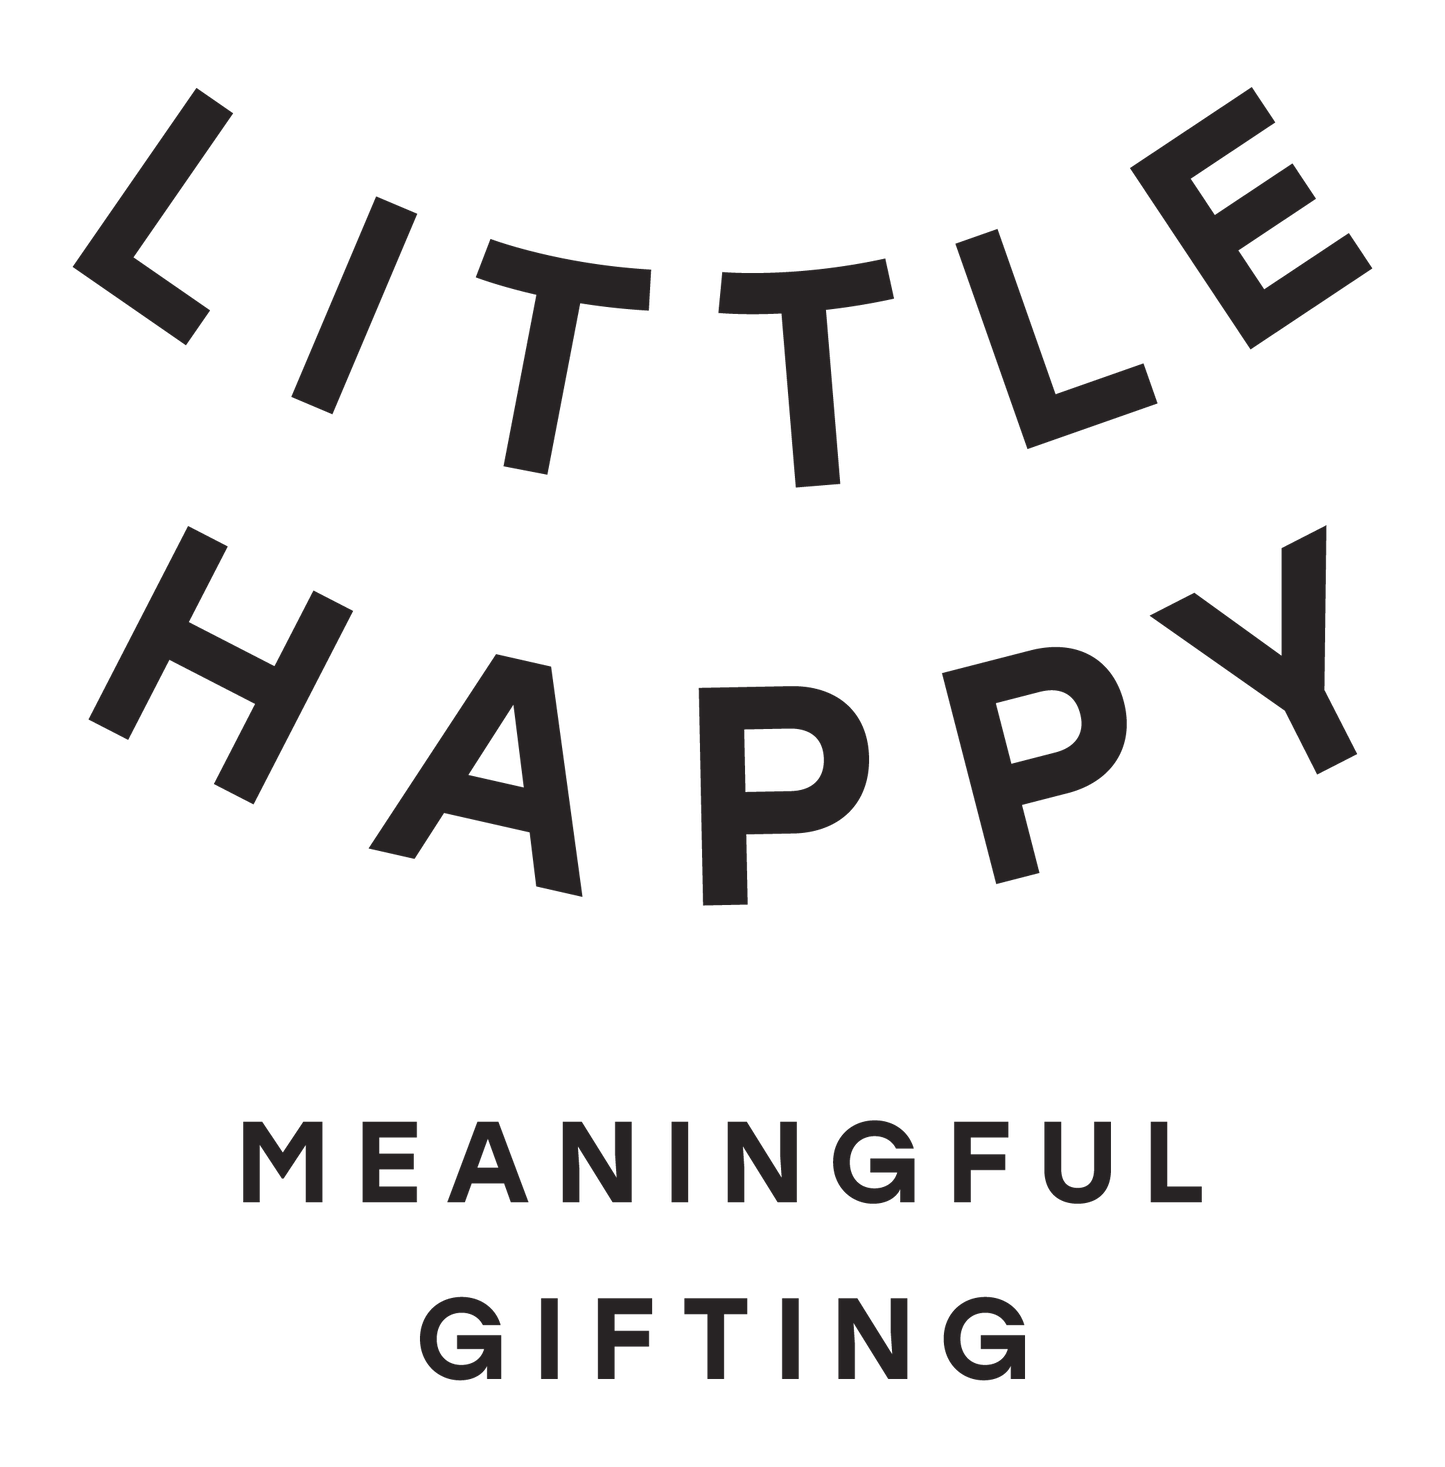 Little Happy Meaningful Gifting